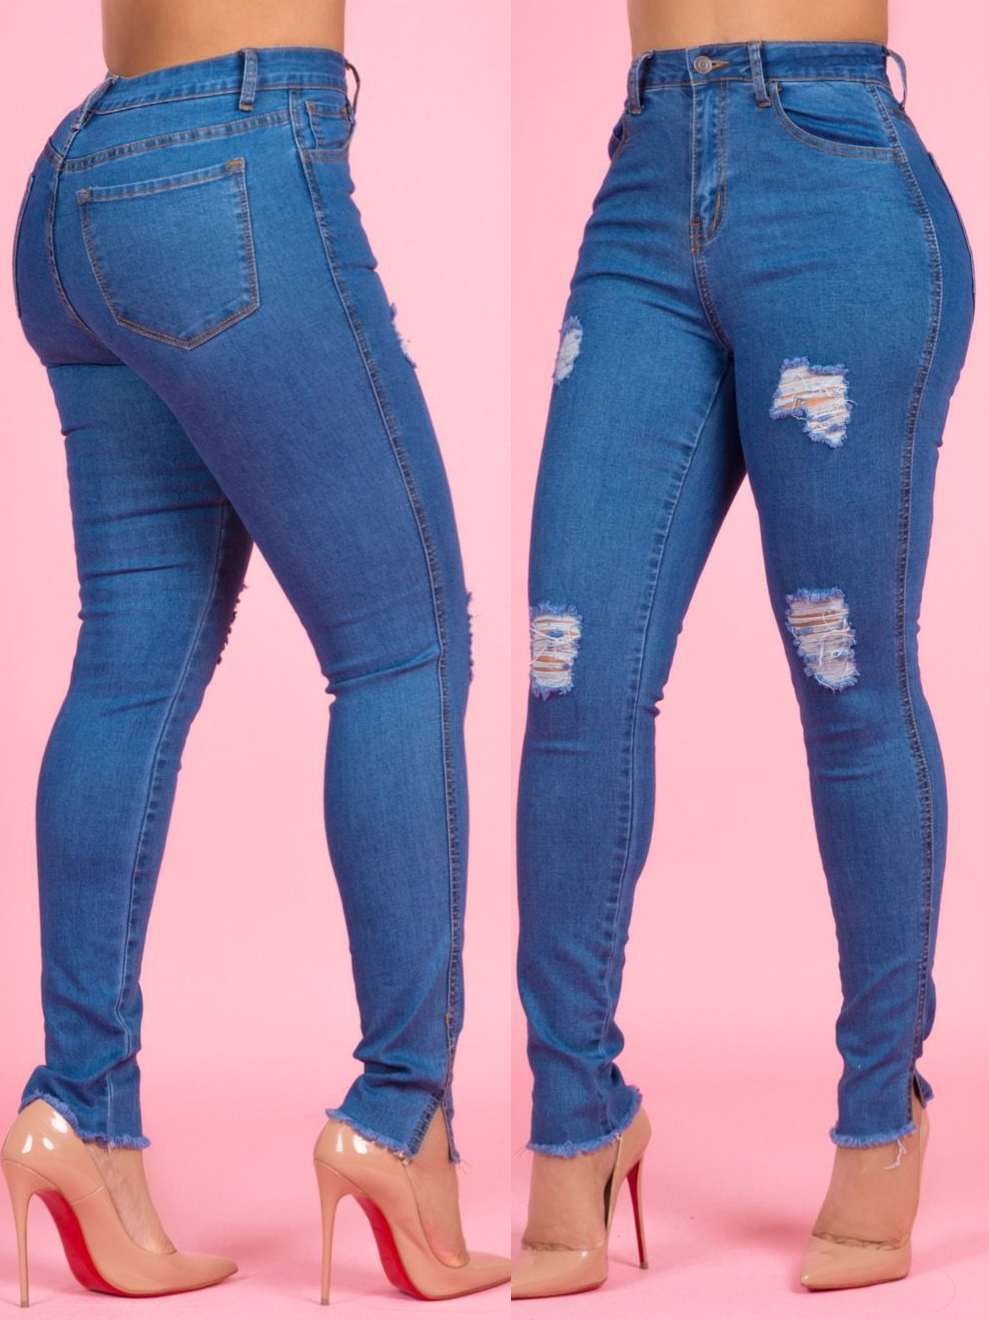 Trendy High Waist Blue Ripped Jeans for women